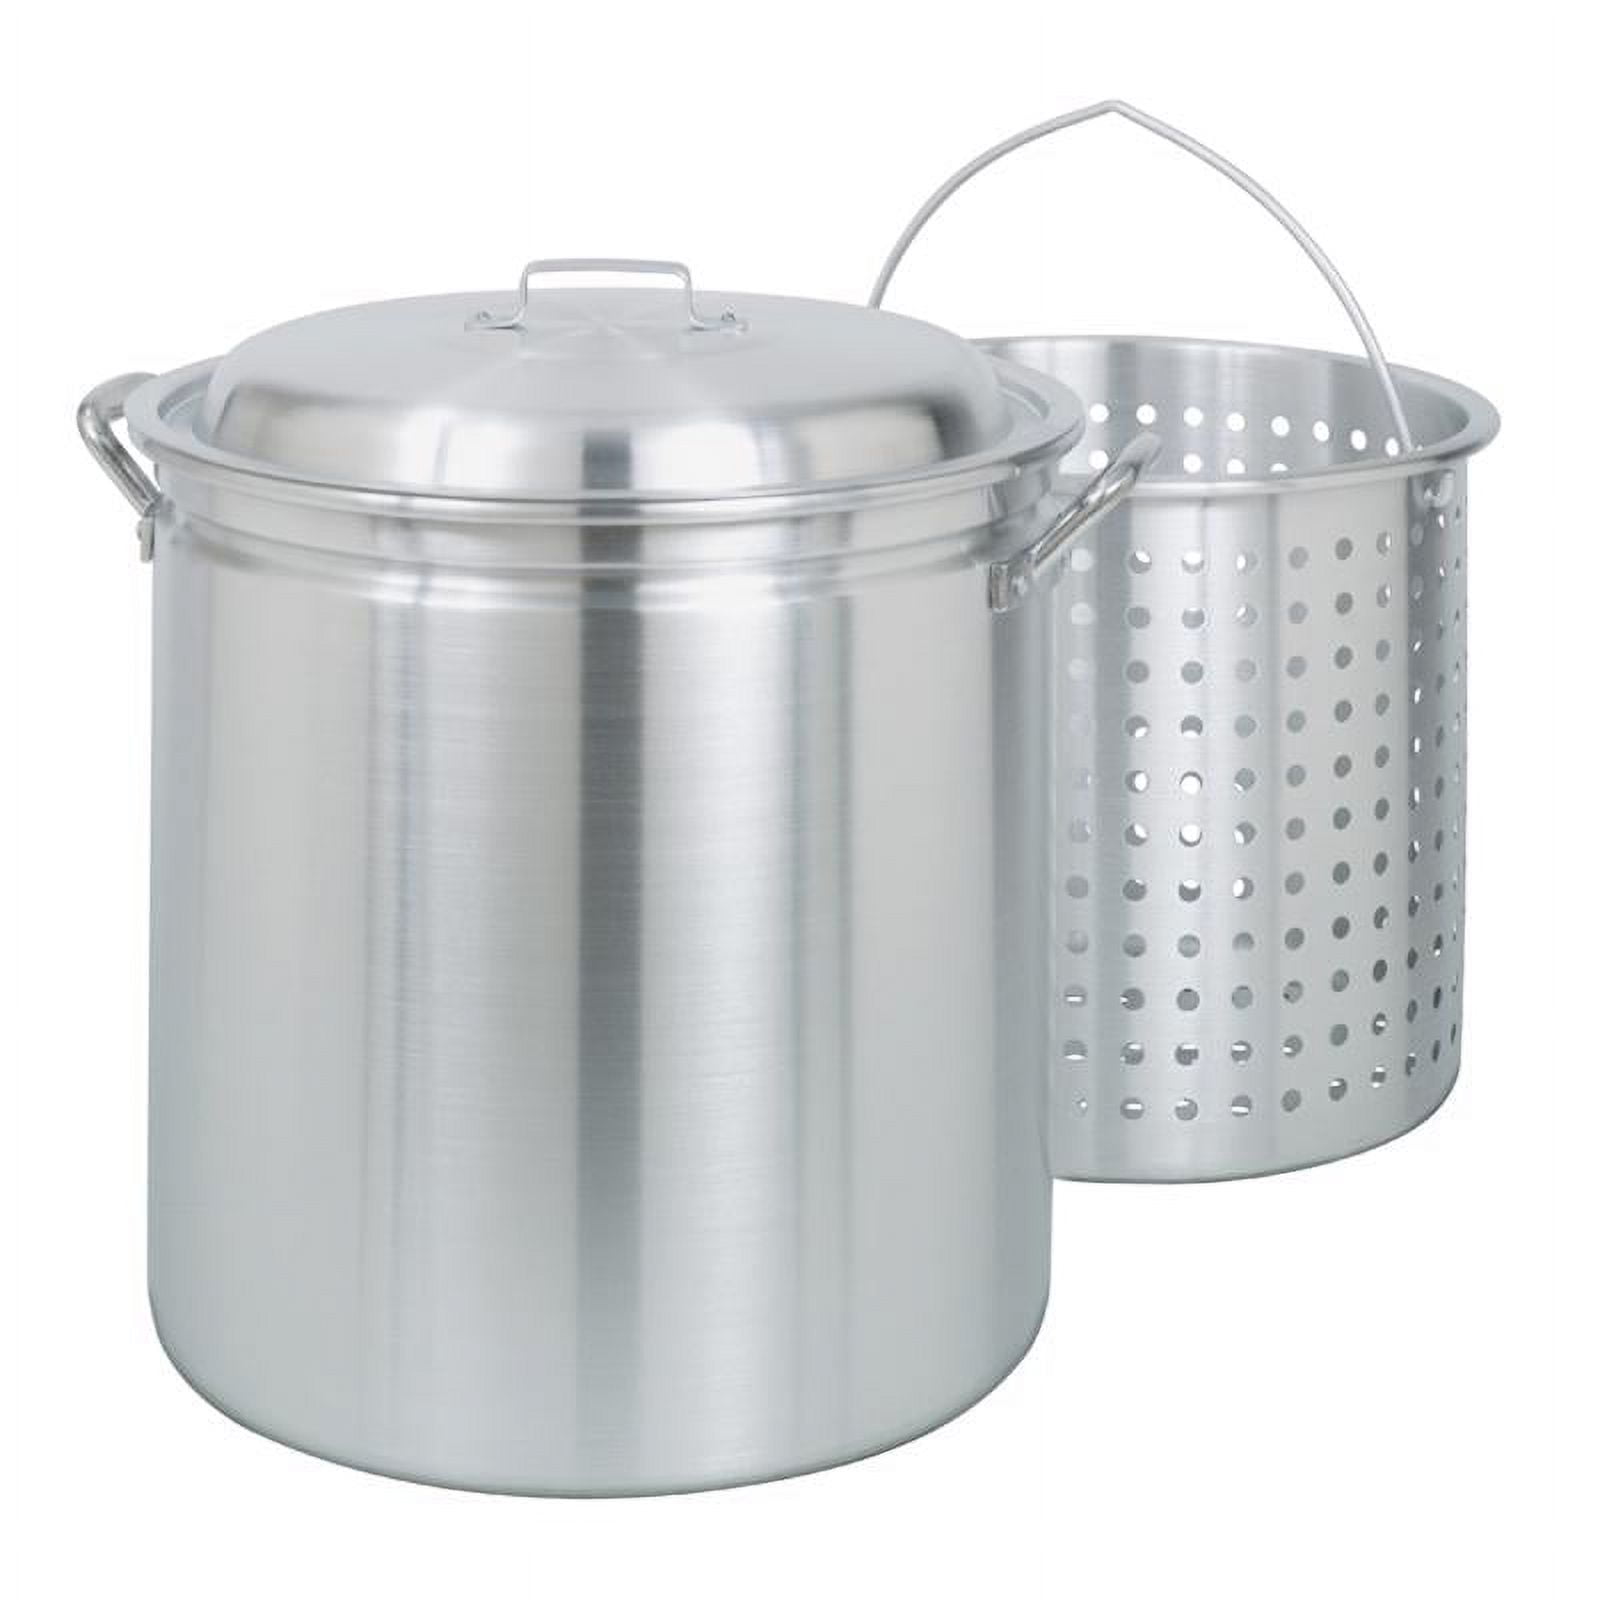 Open Country Aluminum Covered Kettle - 2 Quart Reviews - Trailspace